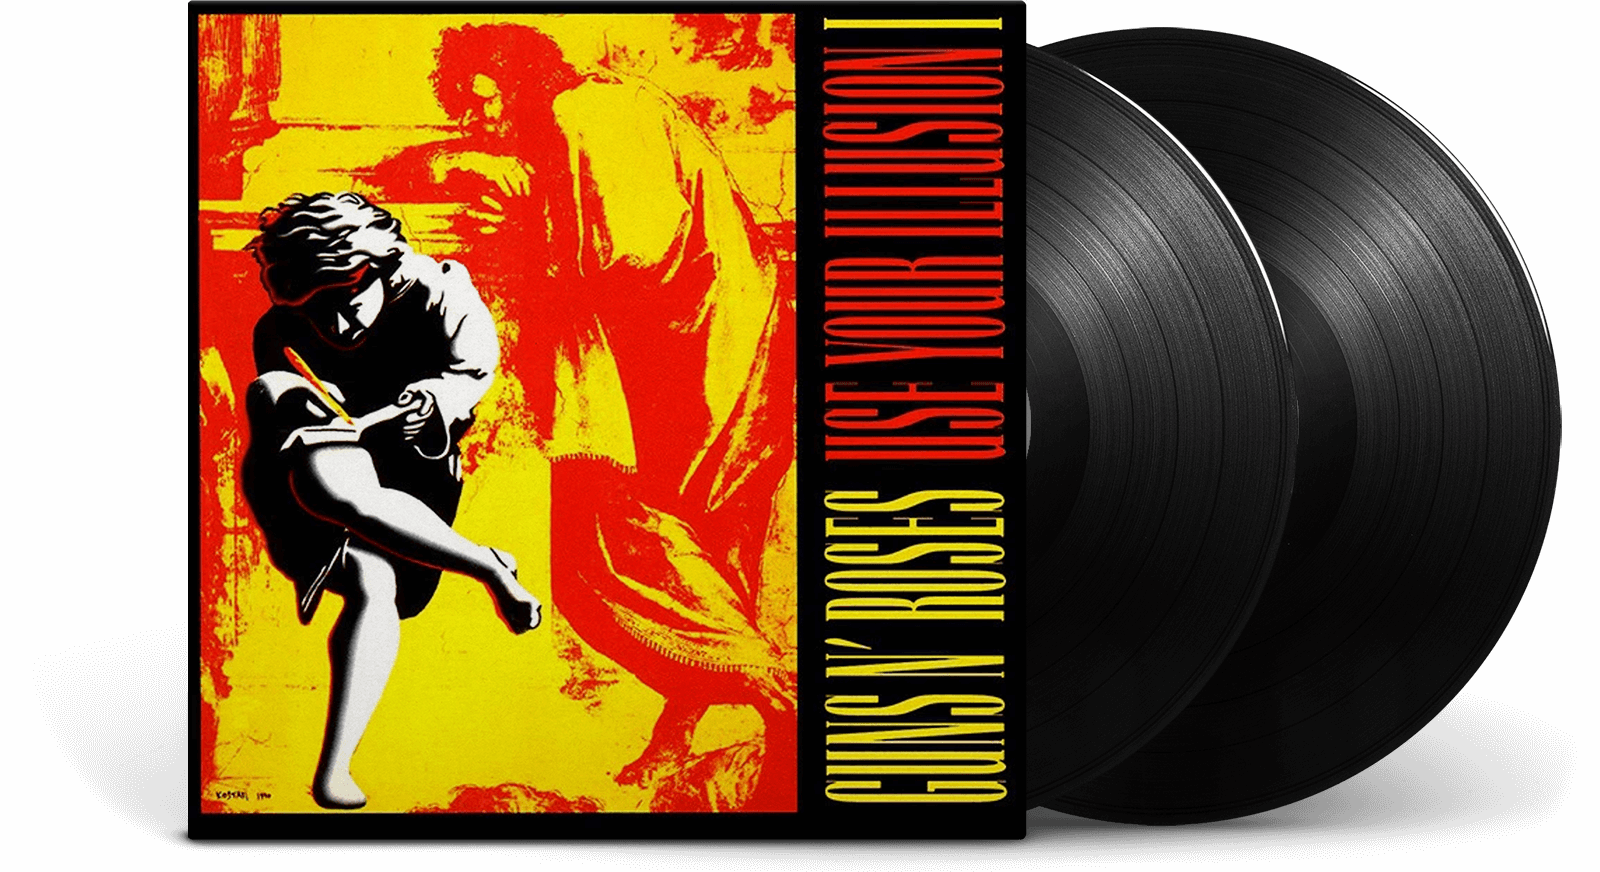 Guns N' Roses – Bad Obsession (1991, CD) - Discogs